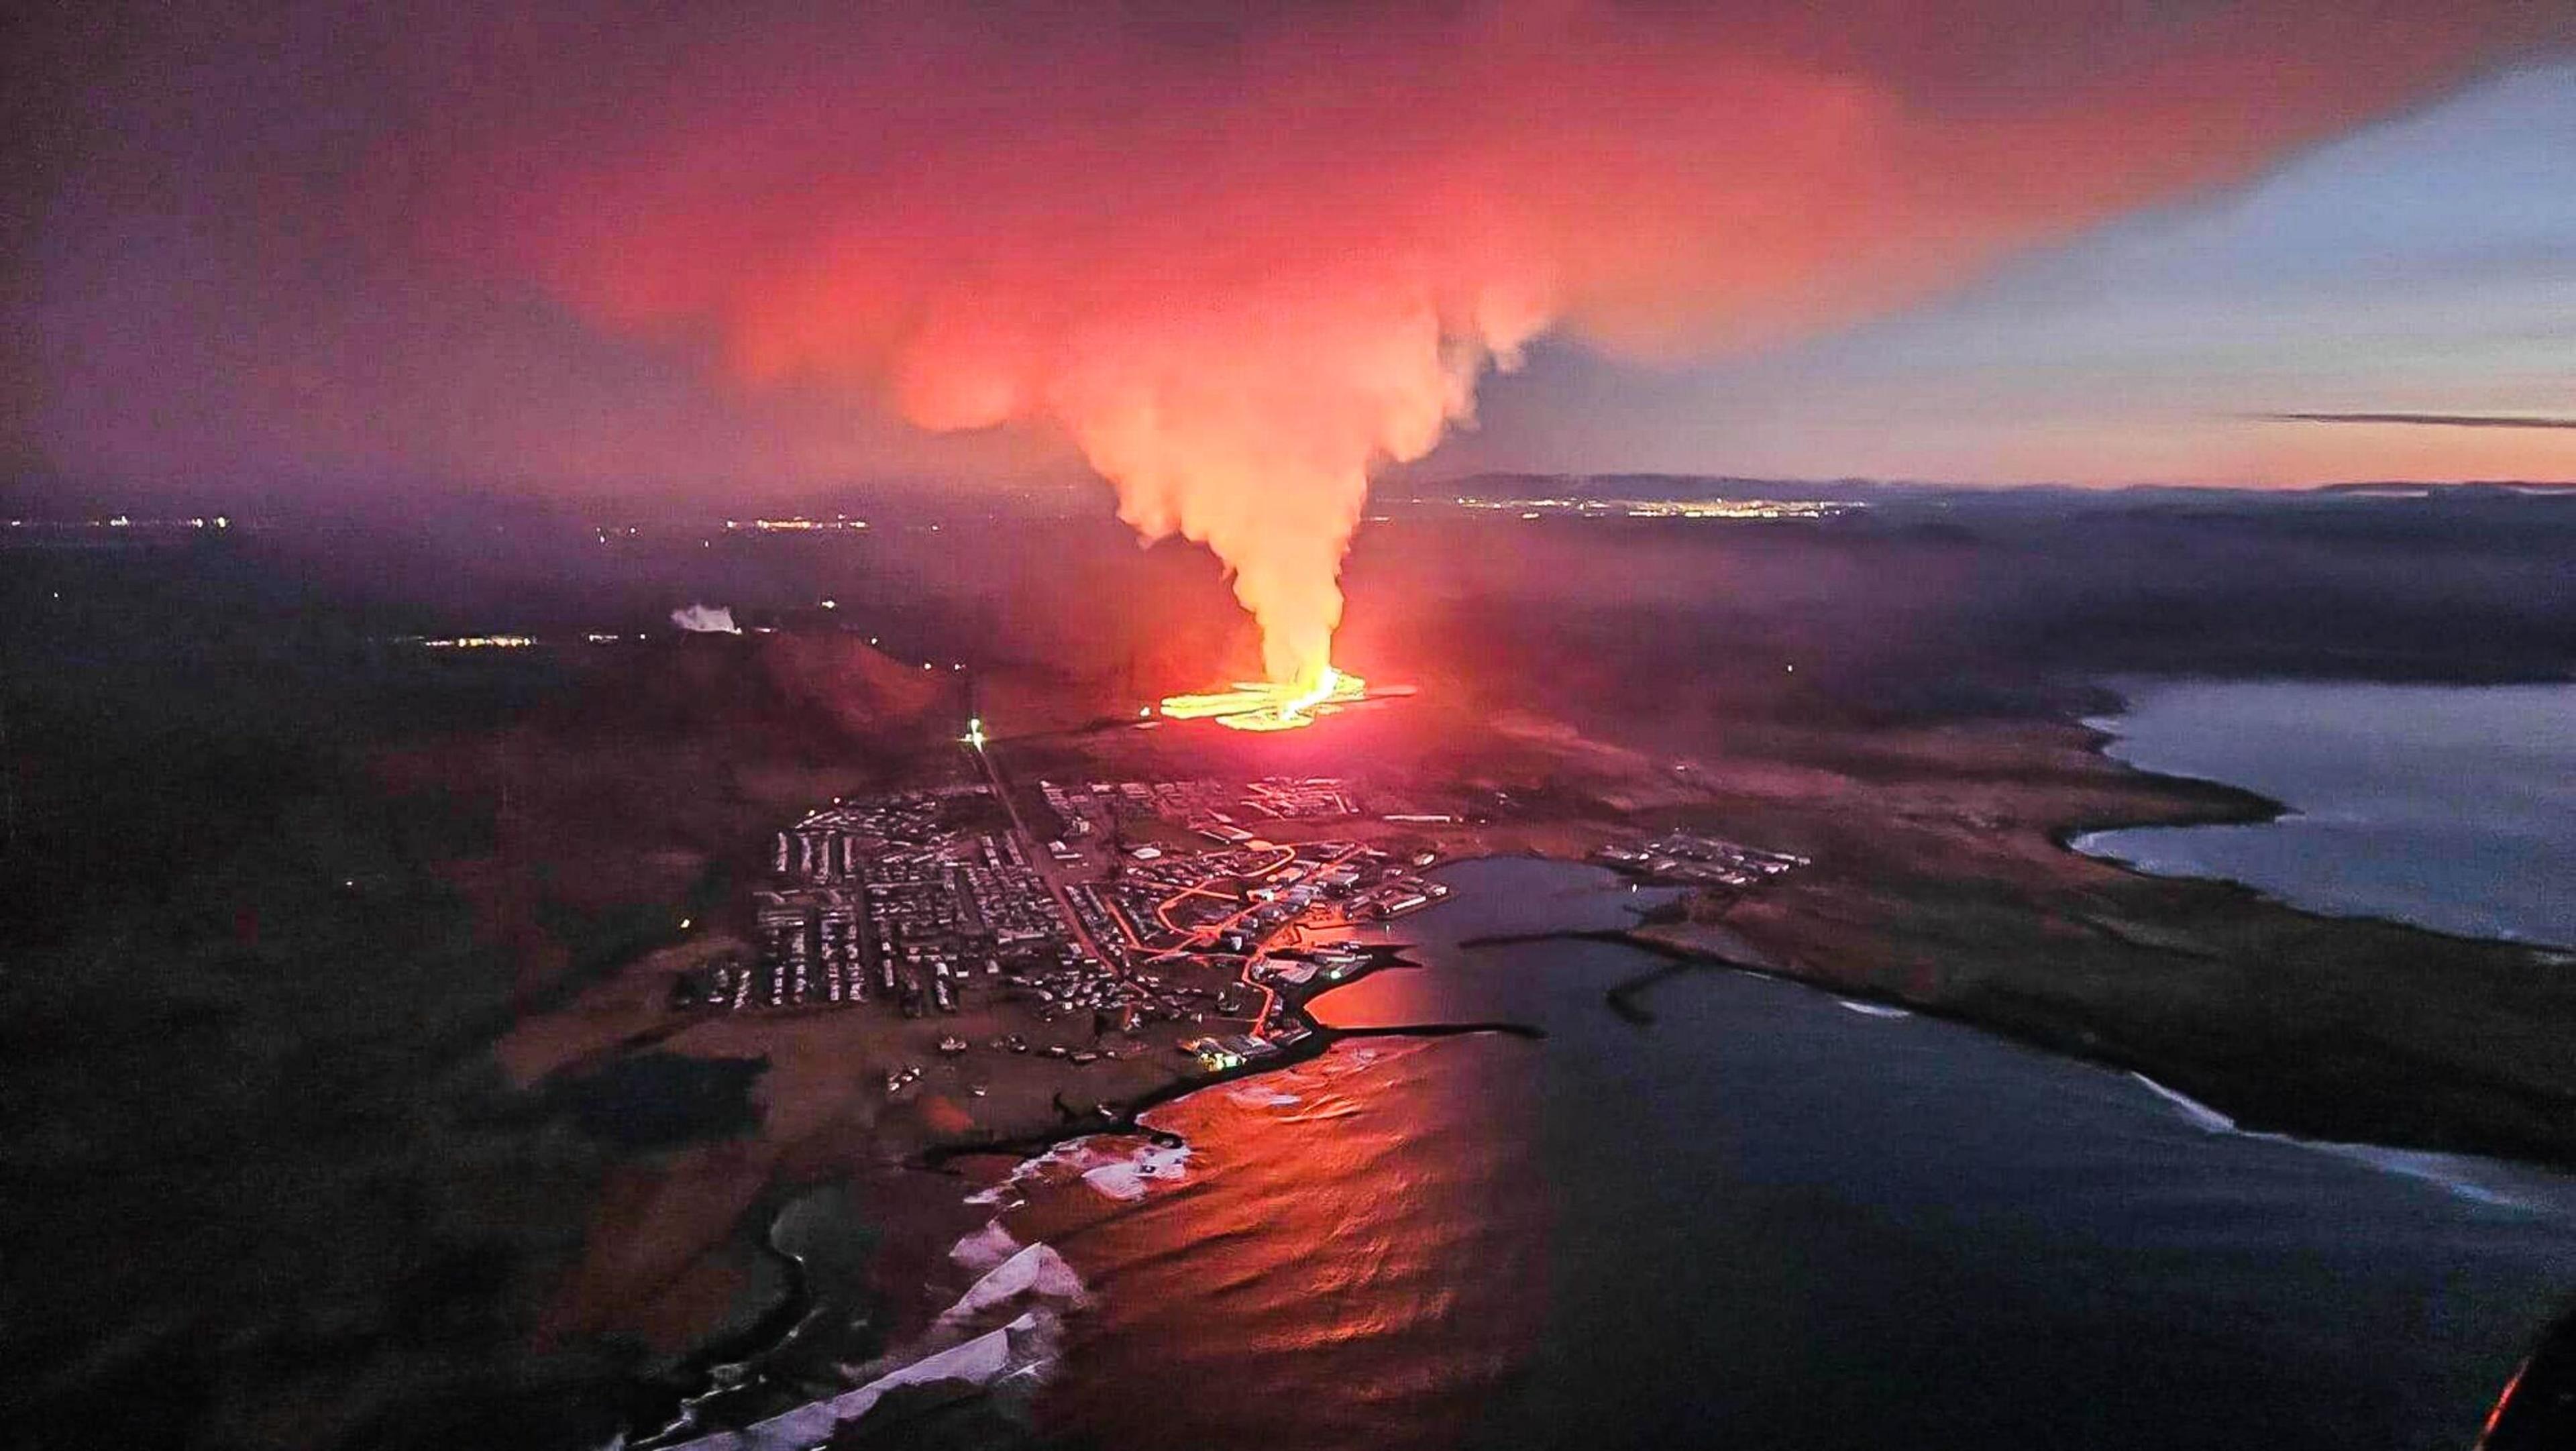 Aerial view of Grindavík's volcanic eruption at dusk, with red-orange lava and smoke against twilight sky.